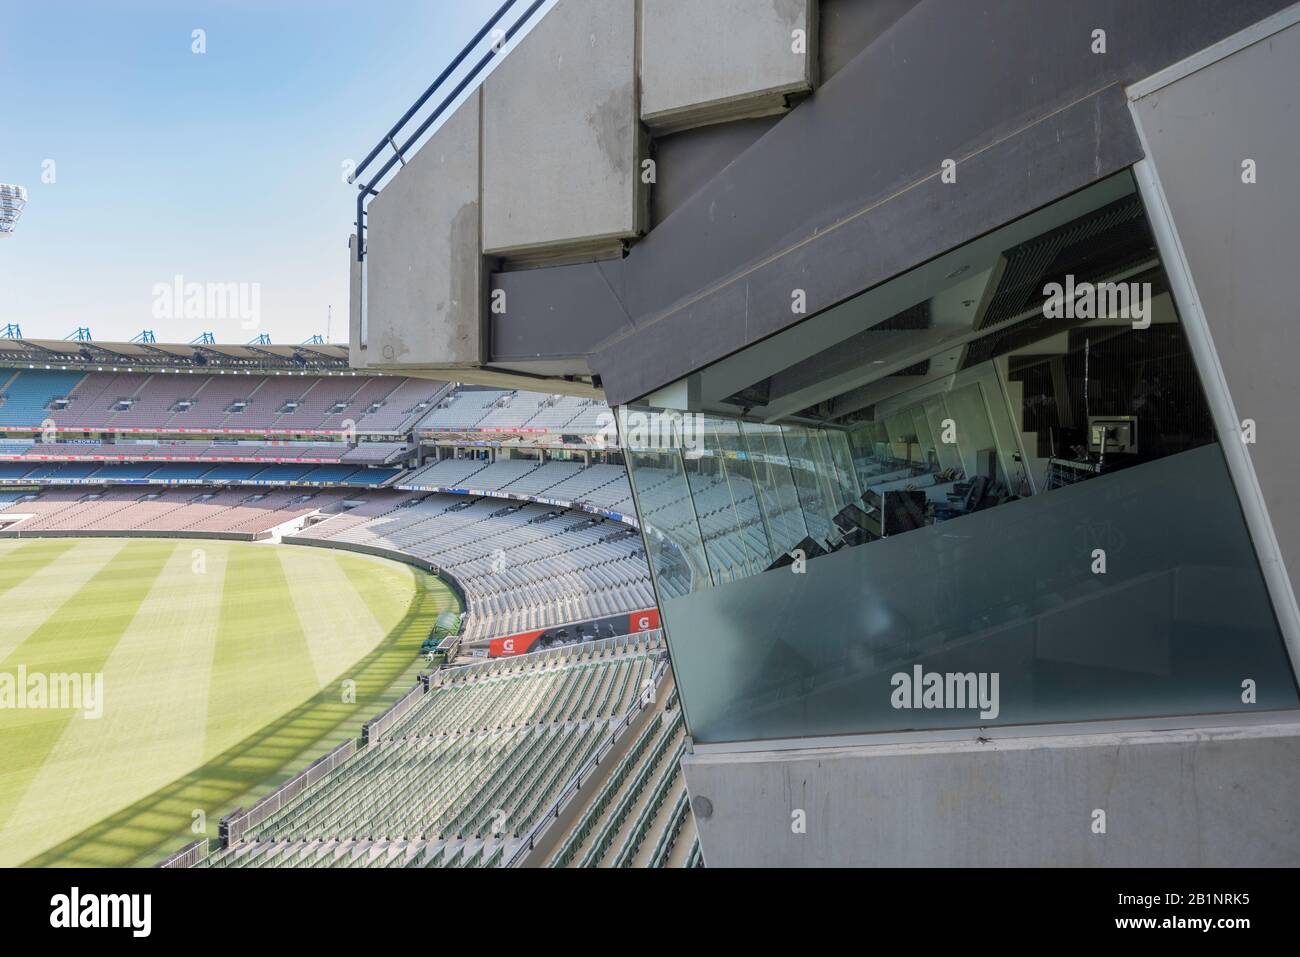 One of the TV and radio sports commentary broadcast boxes at the Melbourne  Cricket Ground (MCG) as the field is being readied for a cricket test match  Stock Photo - Alamy